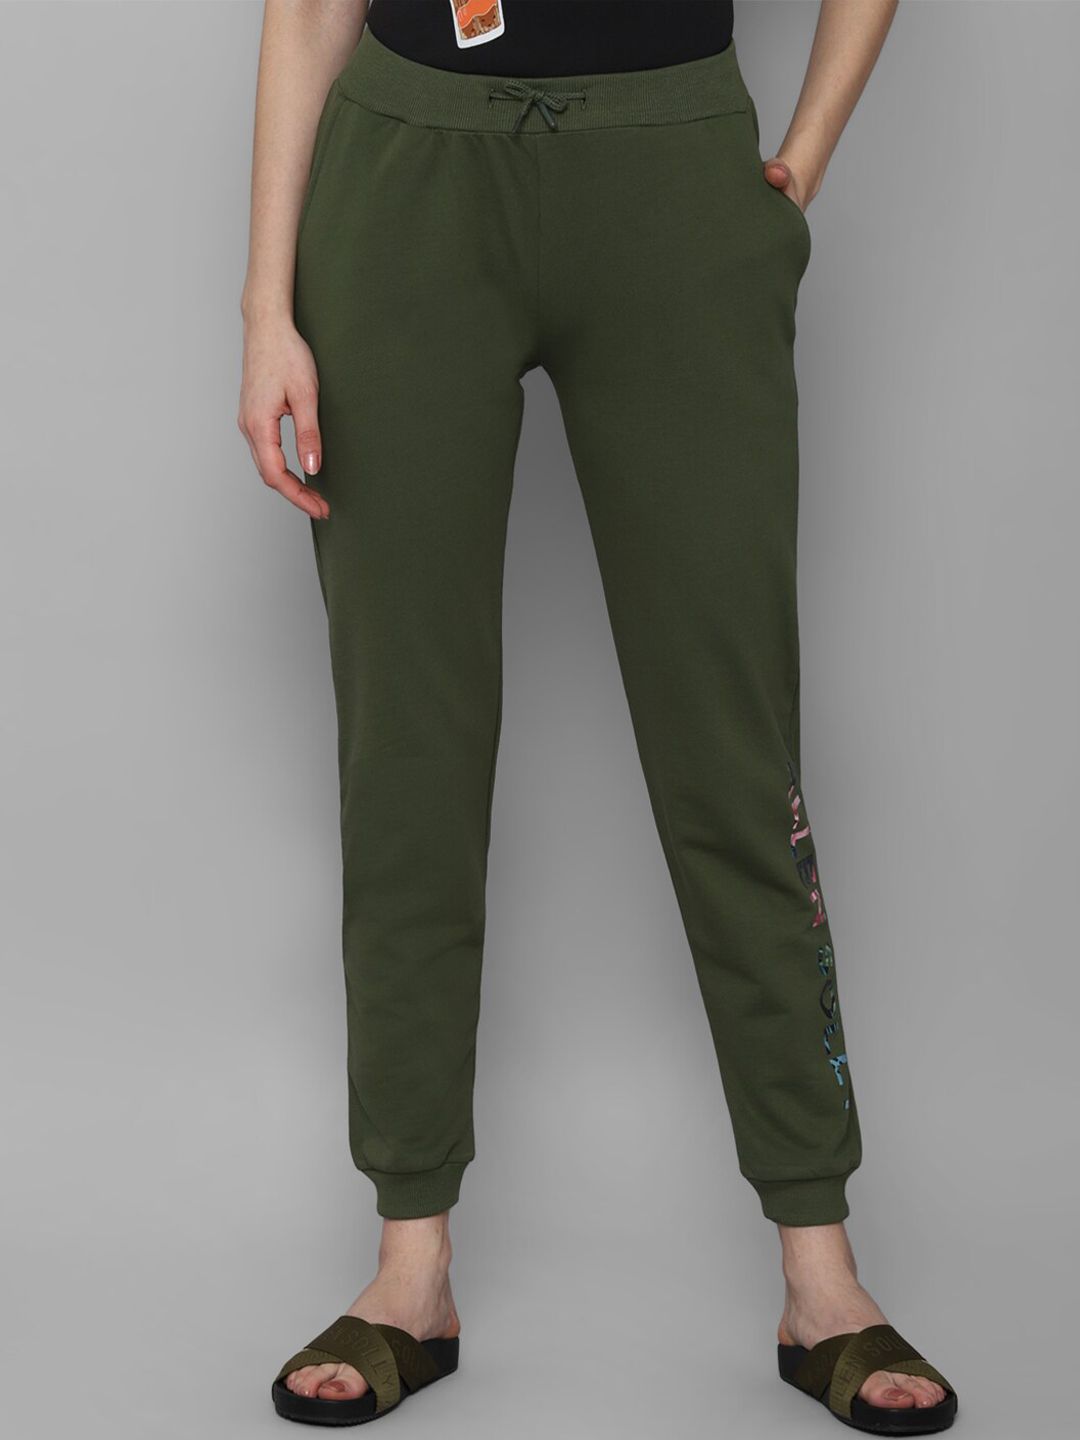 Allen Solly Woman Women Olive Green Pure Cotton Joggers Trousers Price in India